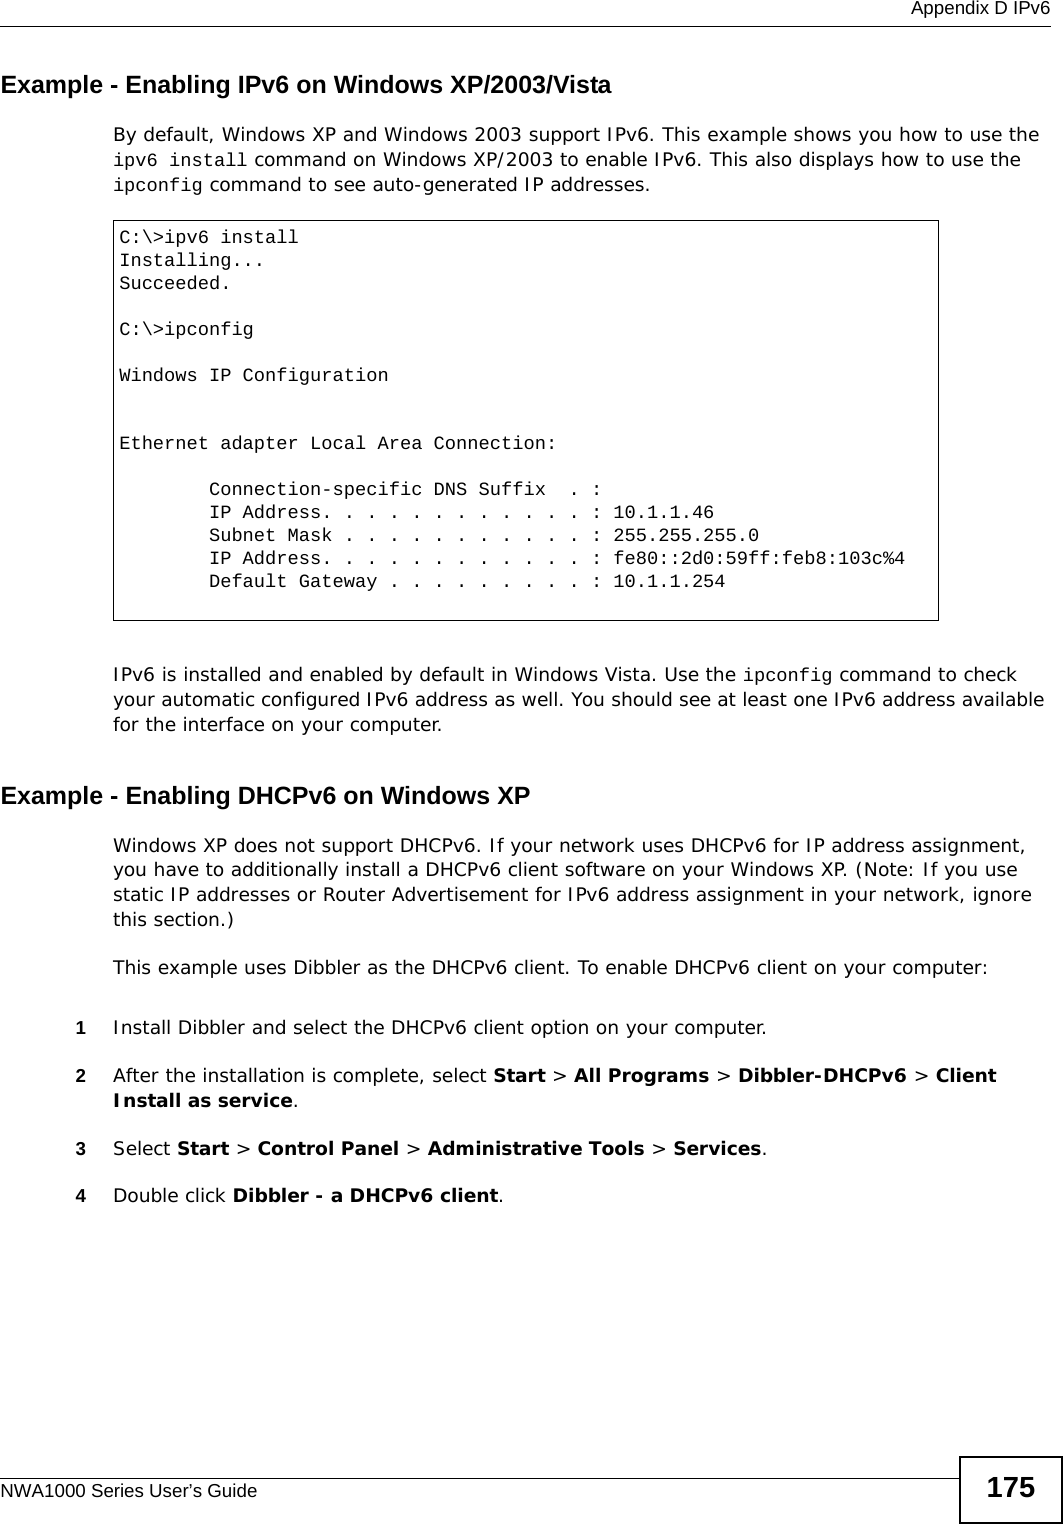  Appendix D IPv6NWA1000 Series User’s Guide 175Example - Enabling IPv6 on Windows XP/2003/VistaBy default, Windows XP and Windows 2003 support IPv6. This example shows you how to use the ipv6 install command on Windows XP/2003 to enable IPv6. This also displays how to use the ipconfig command to see auto-generated IP addresses.IPv6 is installed and enabled by default in Windows Vista. Use the ipconfig command to check your automatic configured IPv6 address as well. You should see at least one IPv6 address available for the interface on your computer.Example - Enabling DHCPv6 on Windows XPWindows XP does not support DHCPv6. If your network uses DHCPv6 for IP address assignment, you have to additionally install a DHCPv6 client software on your Windows XP. (Note: If you use static IP addresses or Router Advertisement for IPv6 address assignment in your network, ignore this section.)This example uses Dibbler as the DHCPv6 client. To enable DHCPv6 client on your computer:1Install Dibbler and select the DHCPv6 client option on your computer.2After the installation is complete, select Start &gt; All Programs &gt; Dibbler-DHCPv6 &gt; Client Install as service.3Select Start &gt; Control Panel &gt; Administrative Tools &gt; Services.4Double click Dibbler - a DHCPv6 client.C:\&gt;ipv6 installInstalling...Succeeded.C:\&gt;ipconfigWindows IP ConfigurationEthernet adapter Local Area Connection:        Connection-specific DNS Suffix  . :         IP Address. . . . . . . . . . . . : 10.1.1.46        Subnet Mask . . . . . . . . . . . : 255.255.255.0        IP Address. . . . . . . . . . . . : fe80::2d0:59ff:feb8:103c%4        Default Gateway . . . . . . . . . : 10.1.1.254